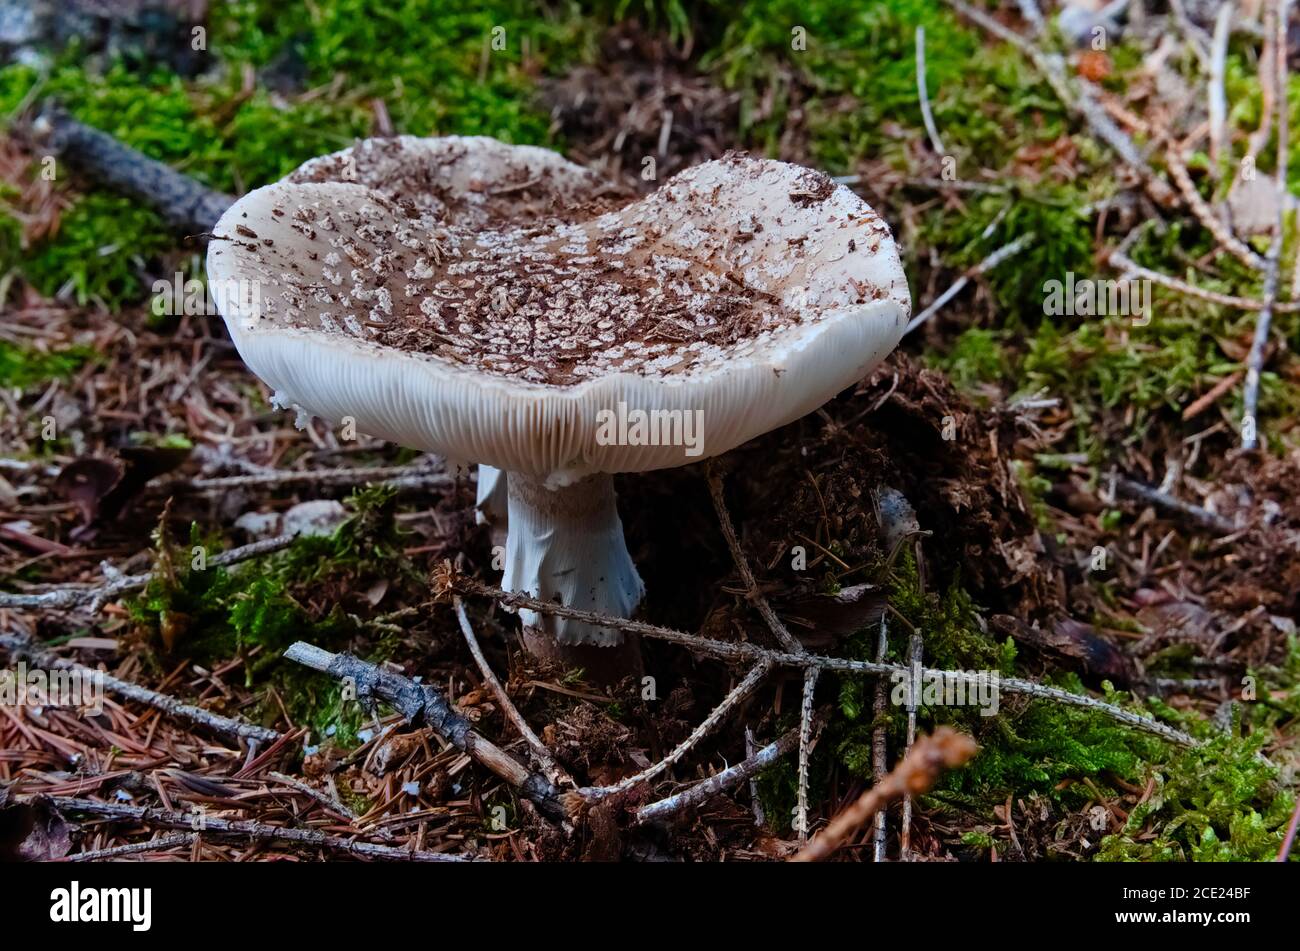 Wild Mushroom known as LBusher growing in the dry boden of the forest. Scientific name Amanita rubescens Stock Photo